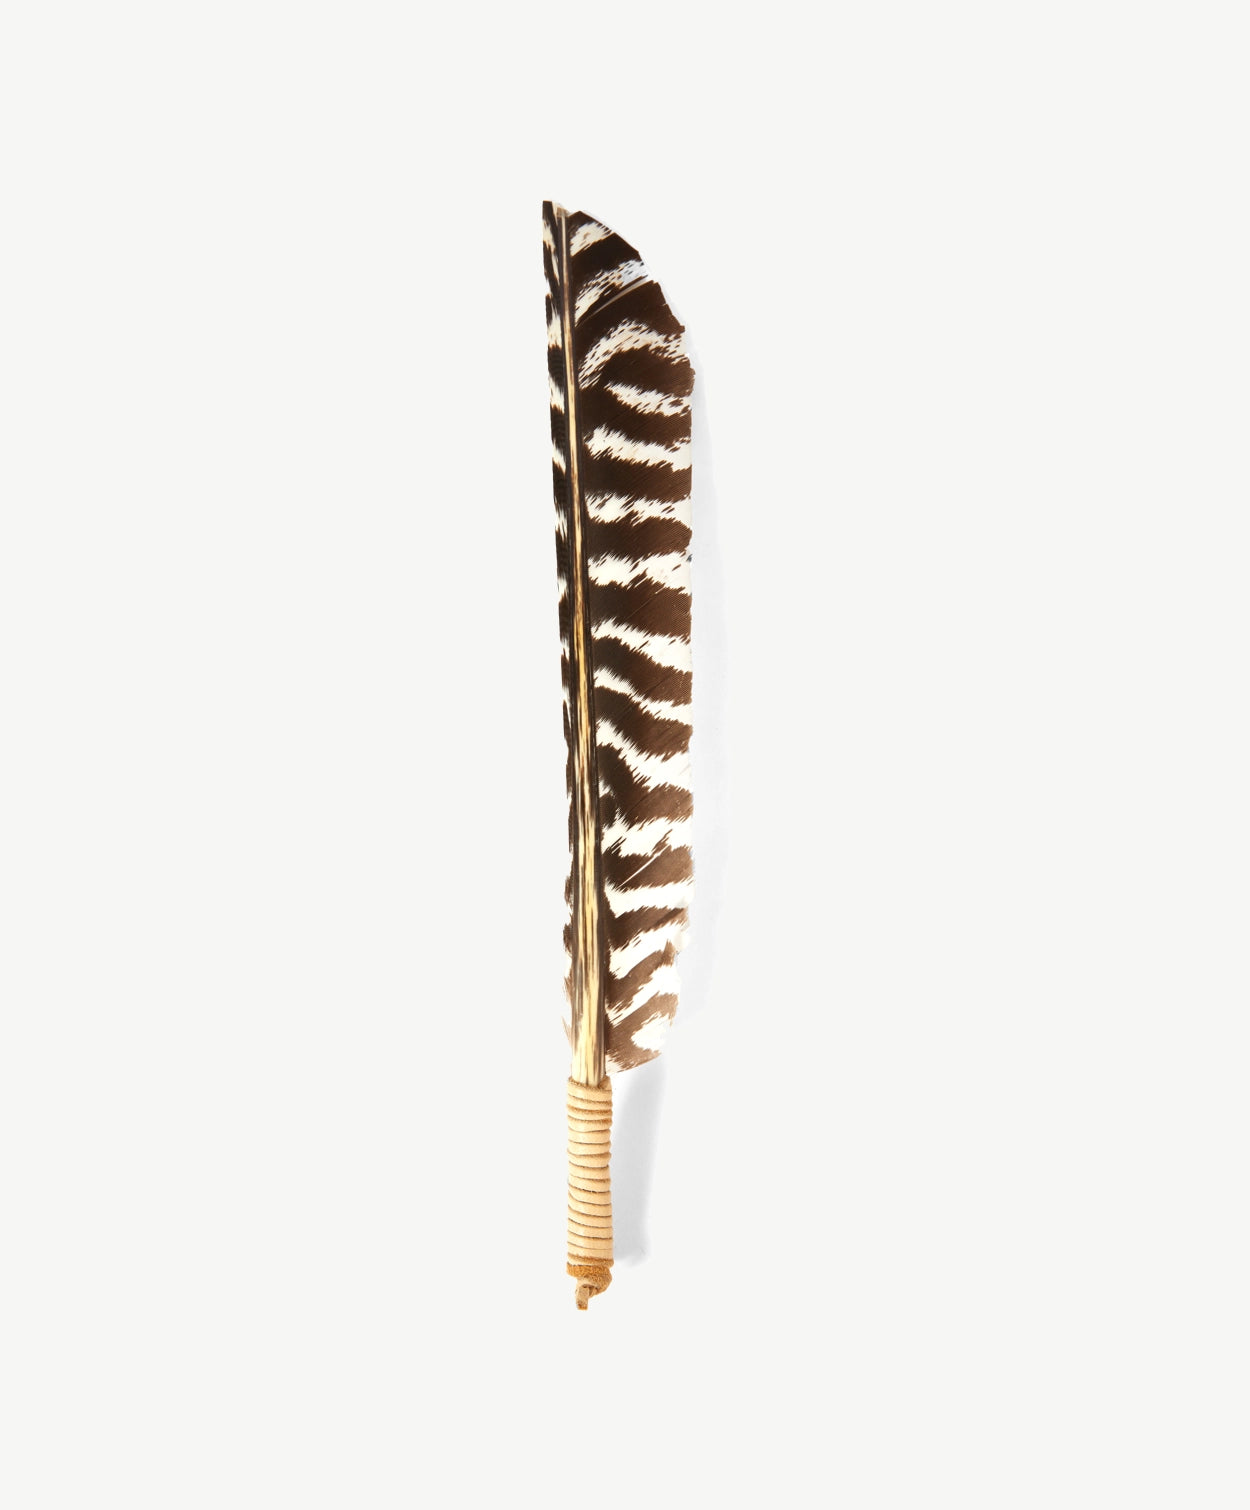 Striped turkey feather tied with leather cord on a white background.